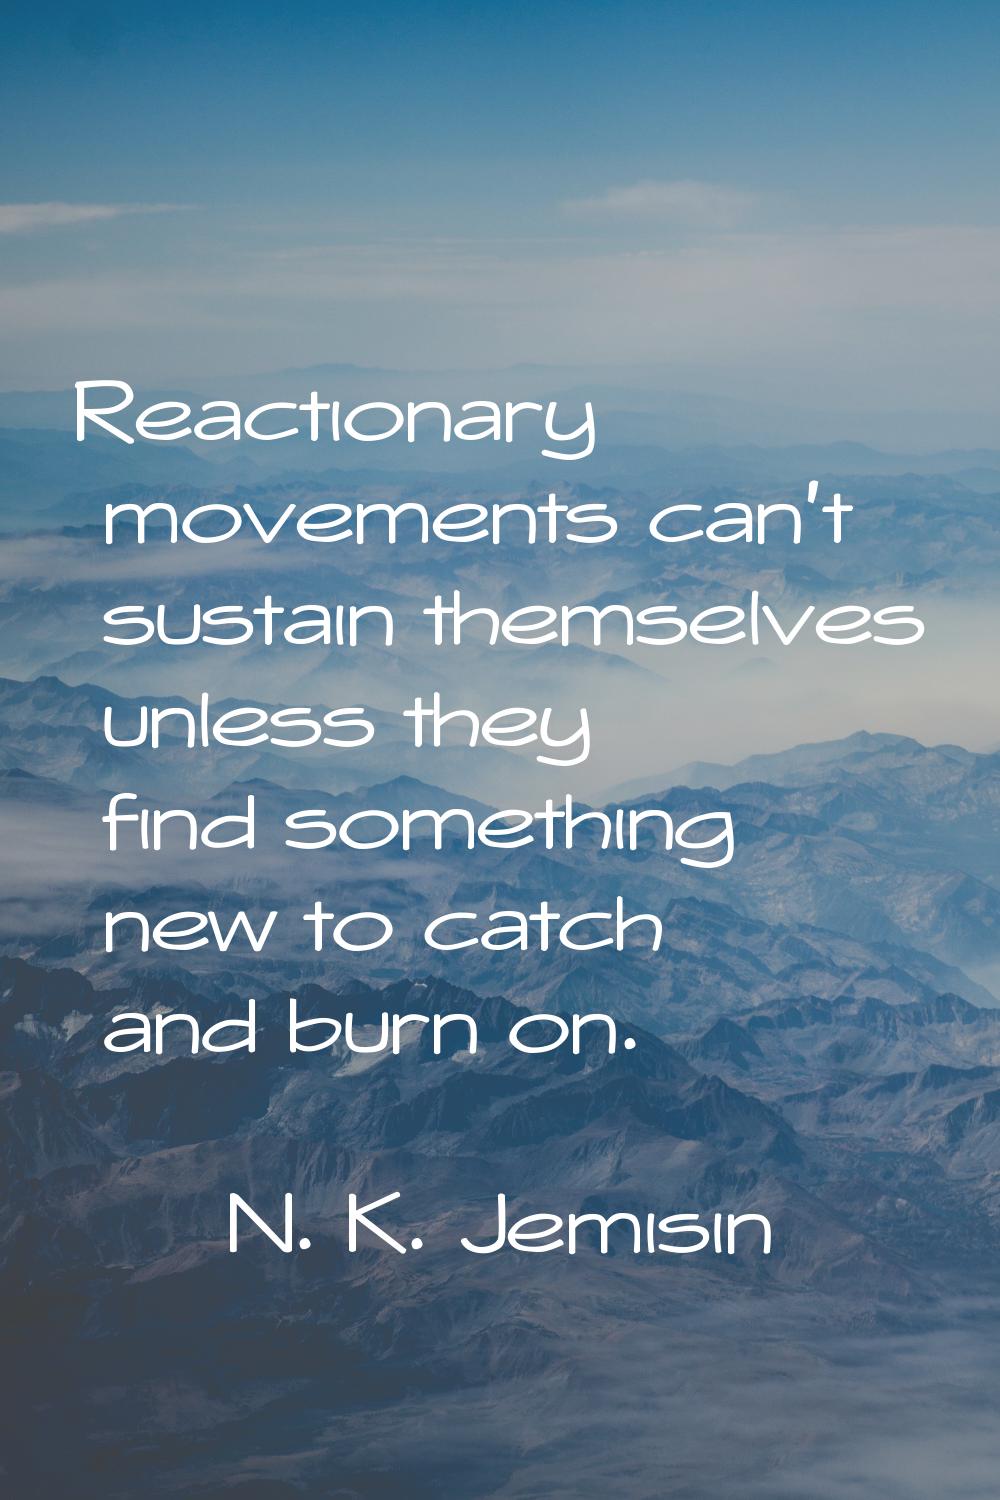 Reactionary movements can't sustain themselves unless they find something new to catch and burn on.